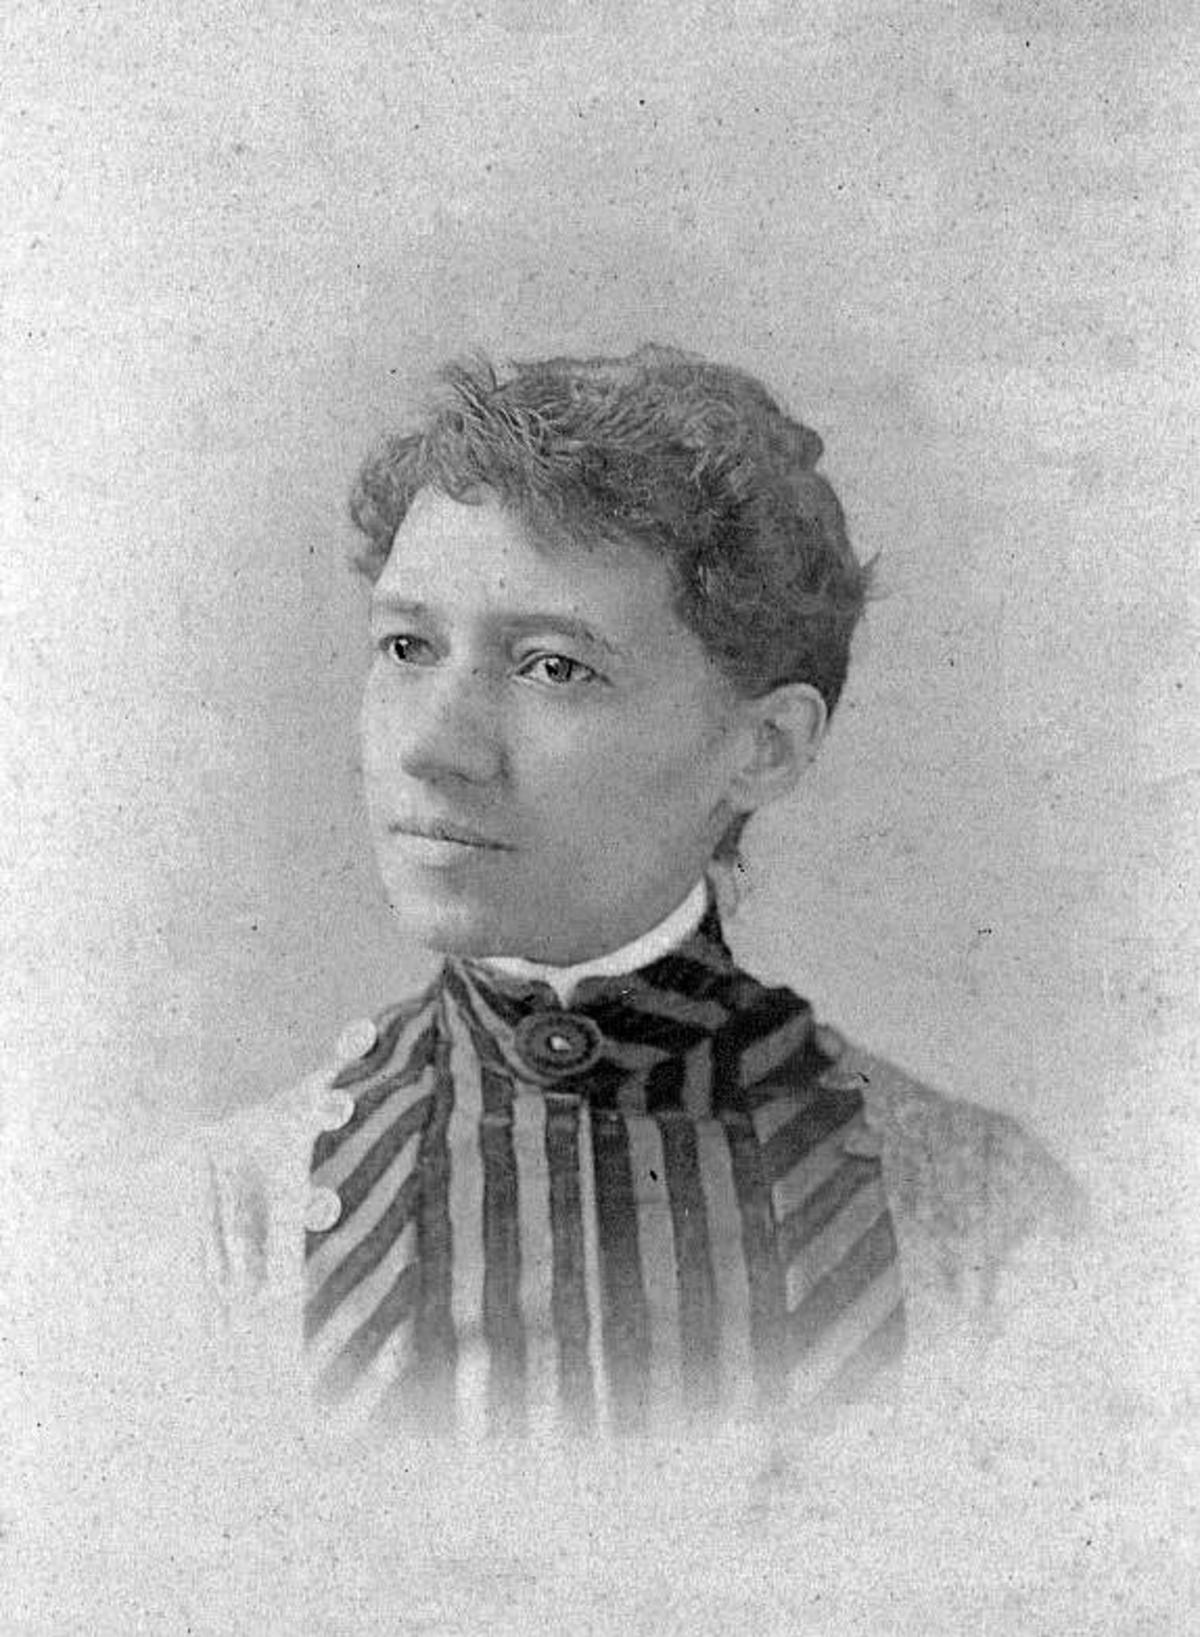 An 1885 photographic portrait of Maria Baldwin. She's wearing a dress with dark and light vertical and diagonal stripes.